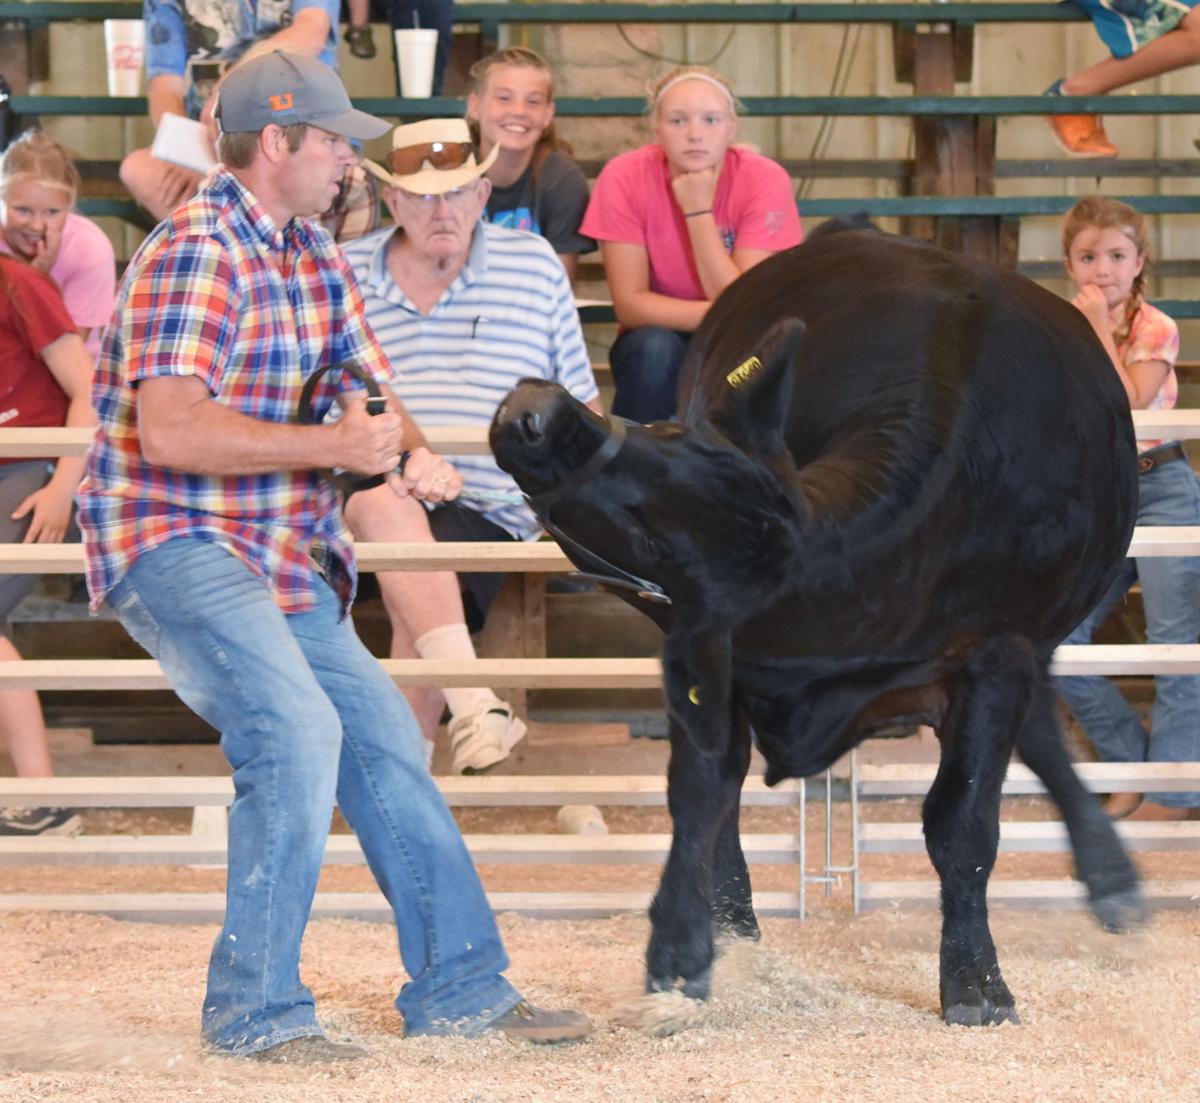 Scenes from the Cass County 4H Fair Wednesday, July 12, 2017 Cass